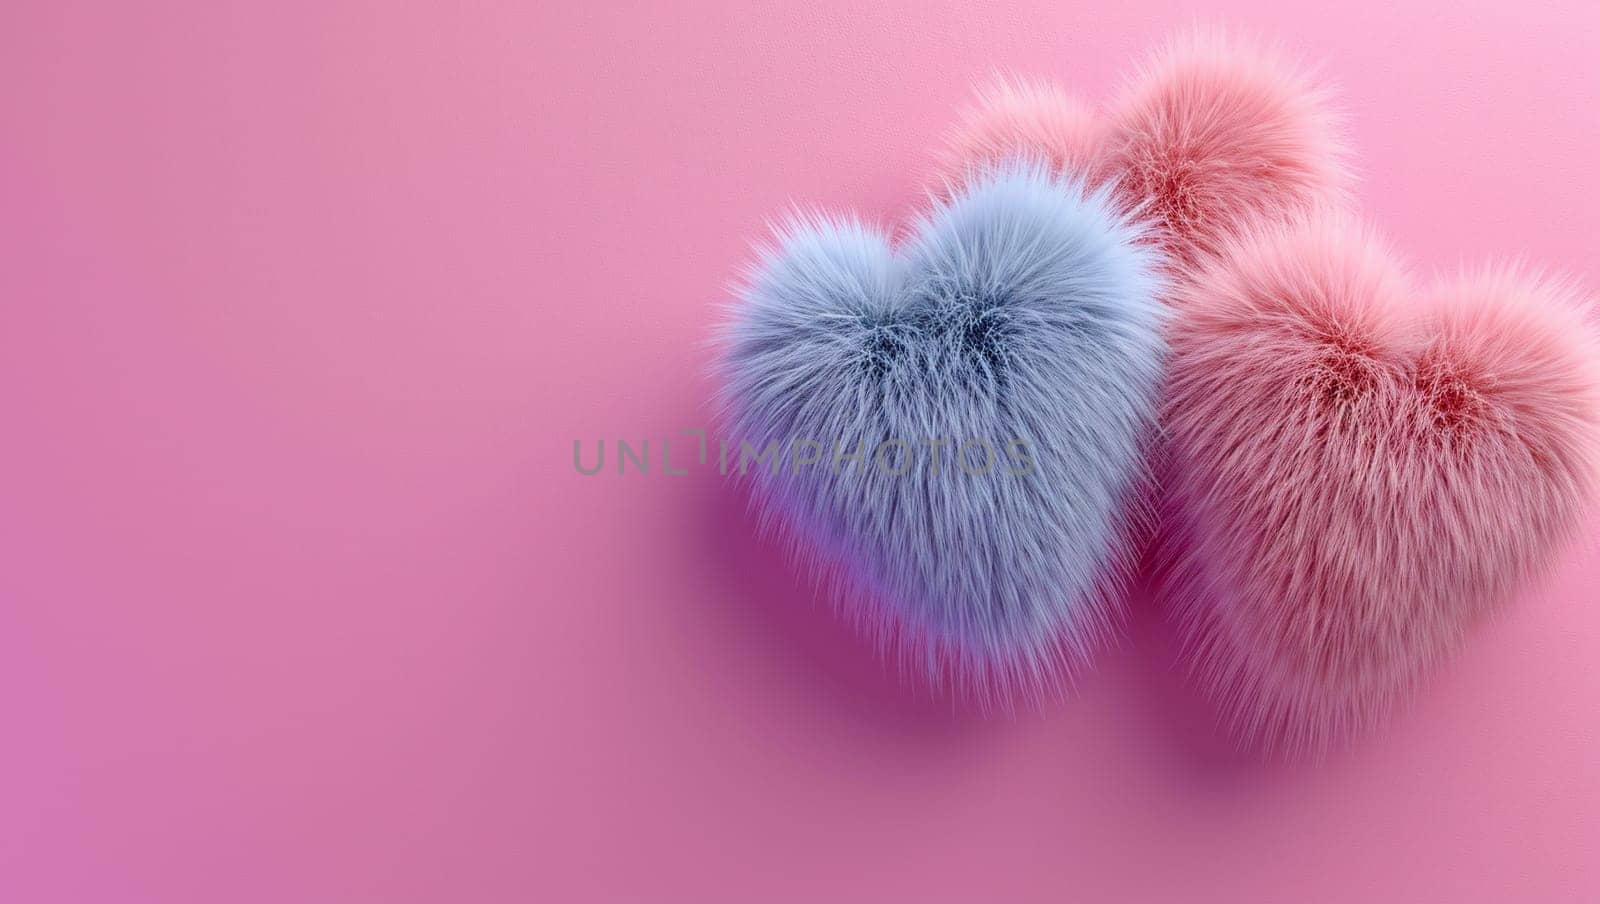 Fur hearts on a pink background. Love and Valentine's day. by Sneznyj